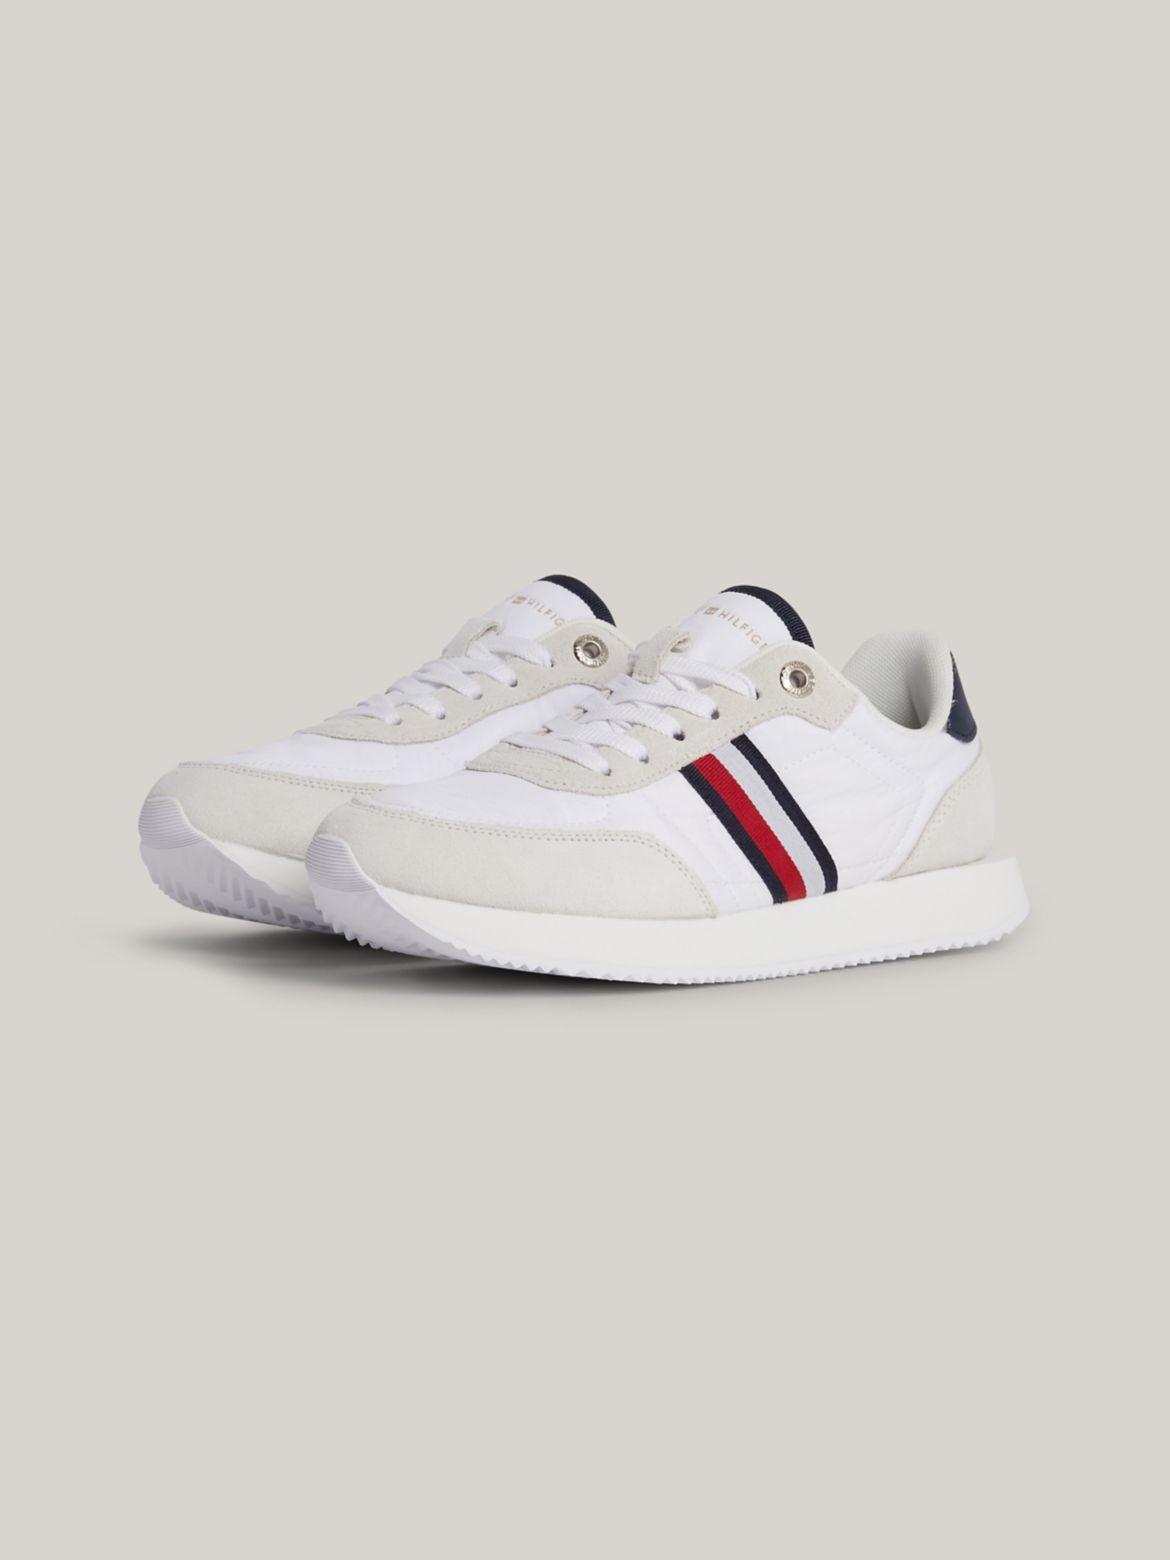 Tommy Hilfiger Women's Signature Stripe Suede Sneaker Product Image